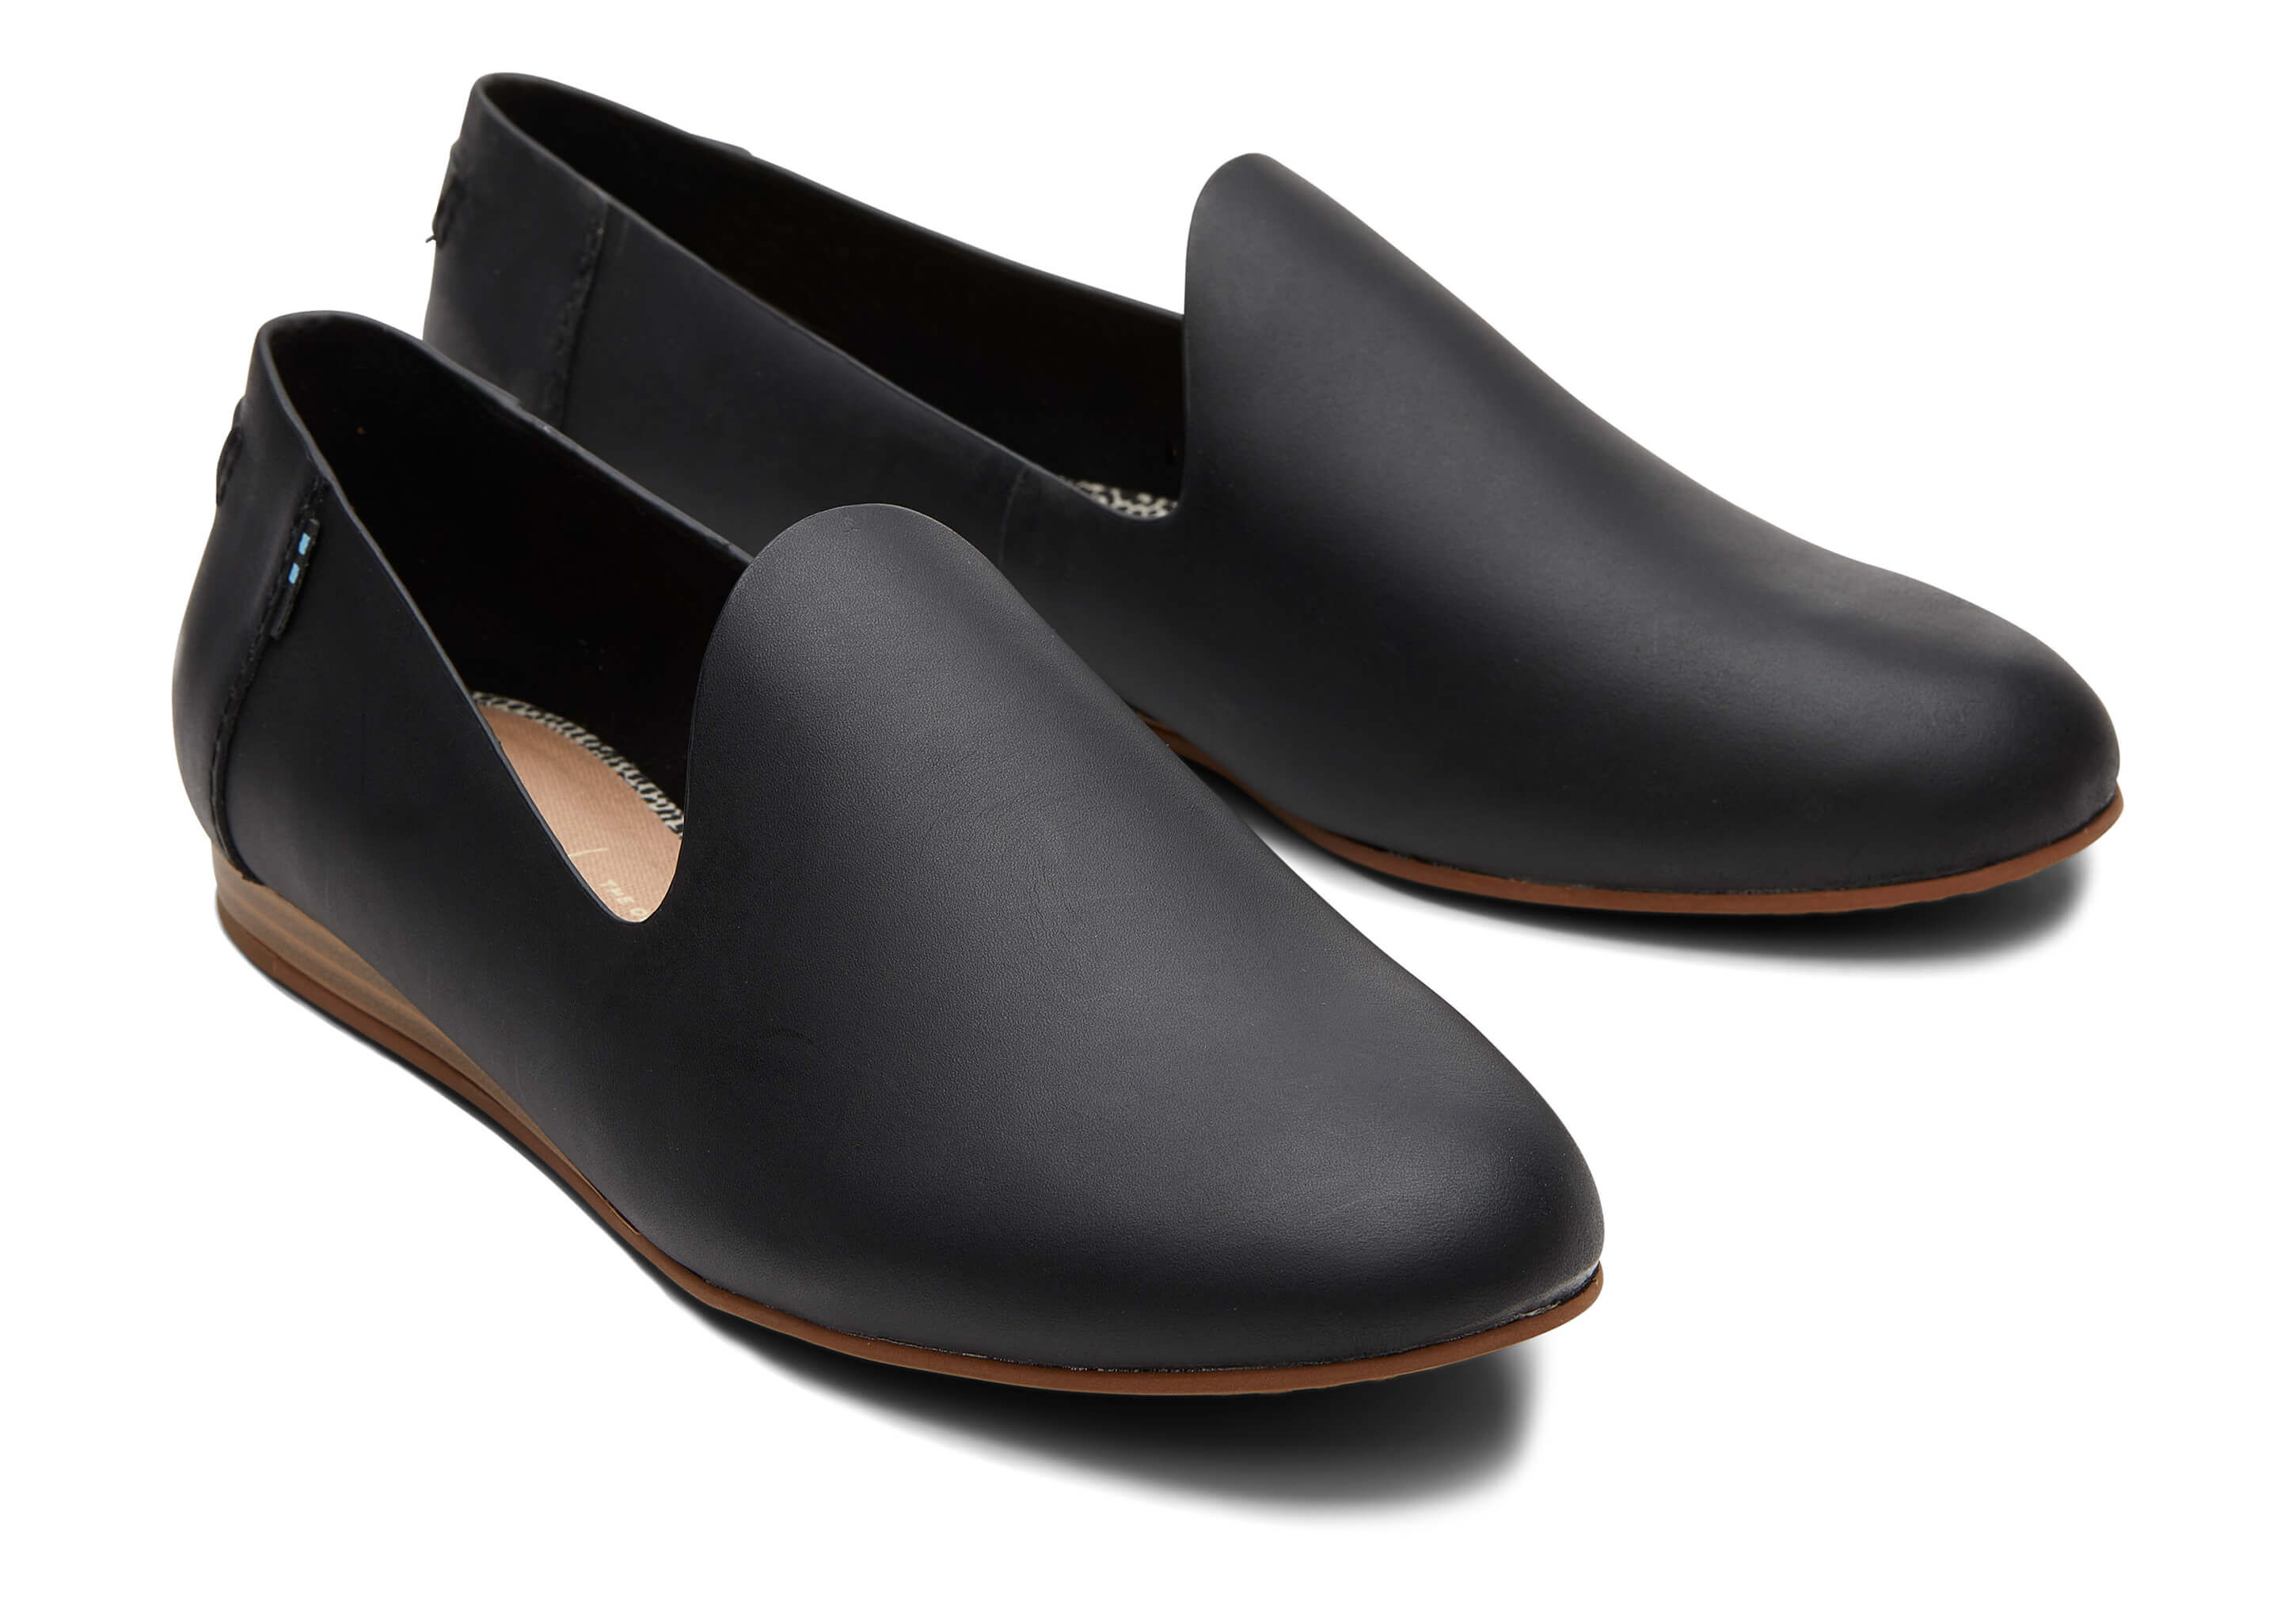 toms leather slip on shoes